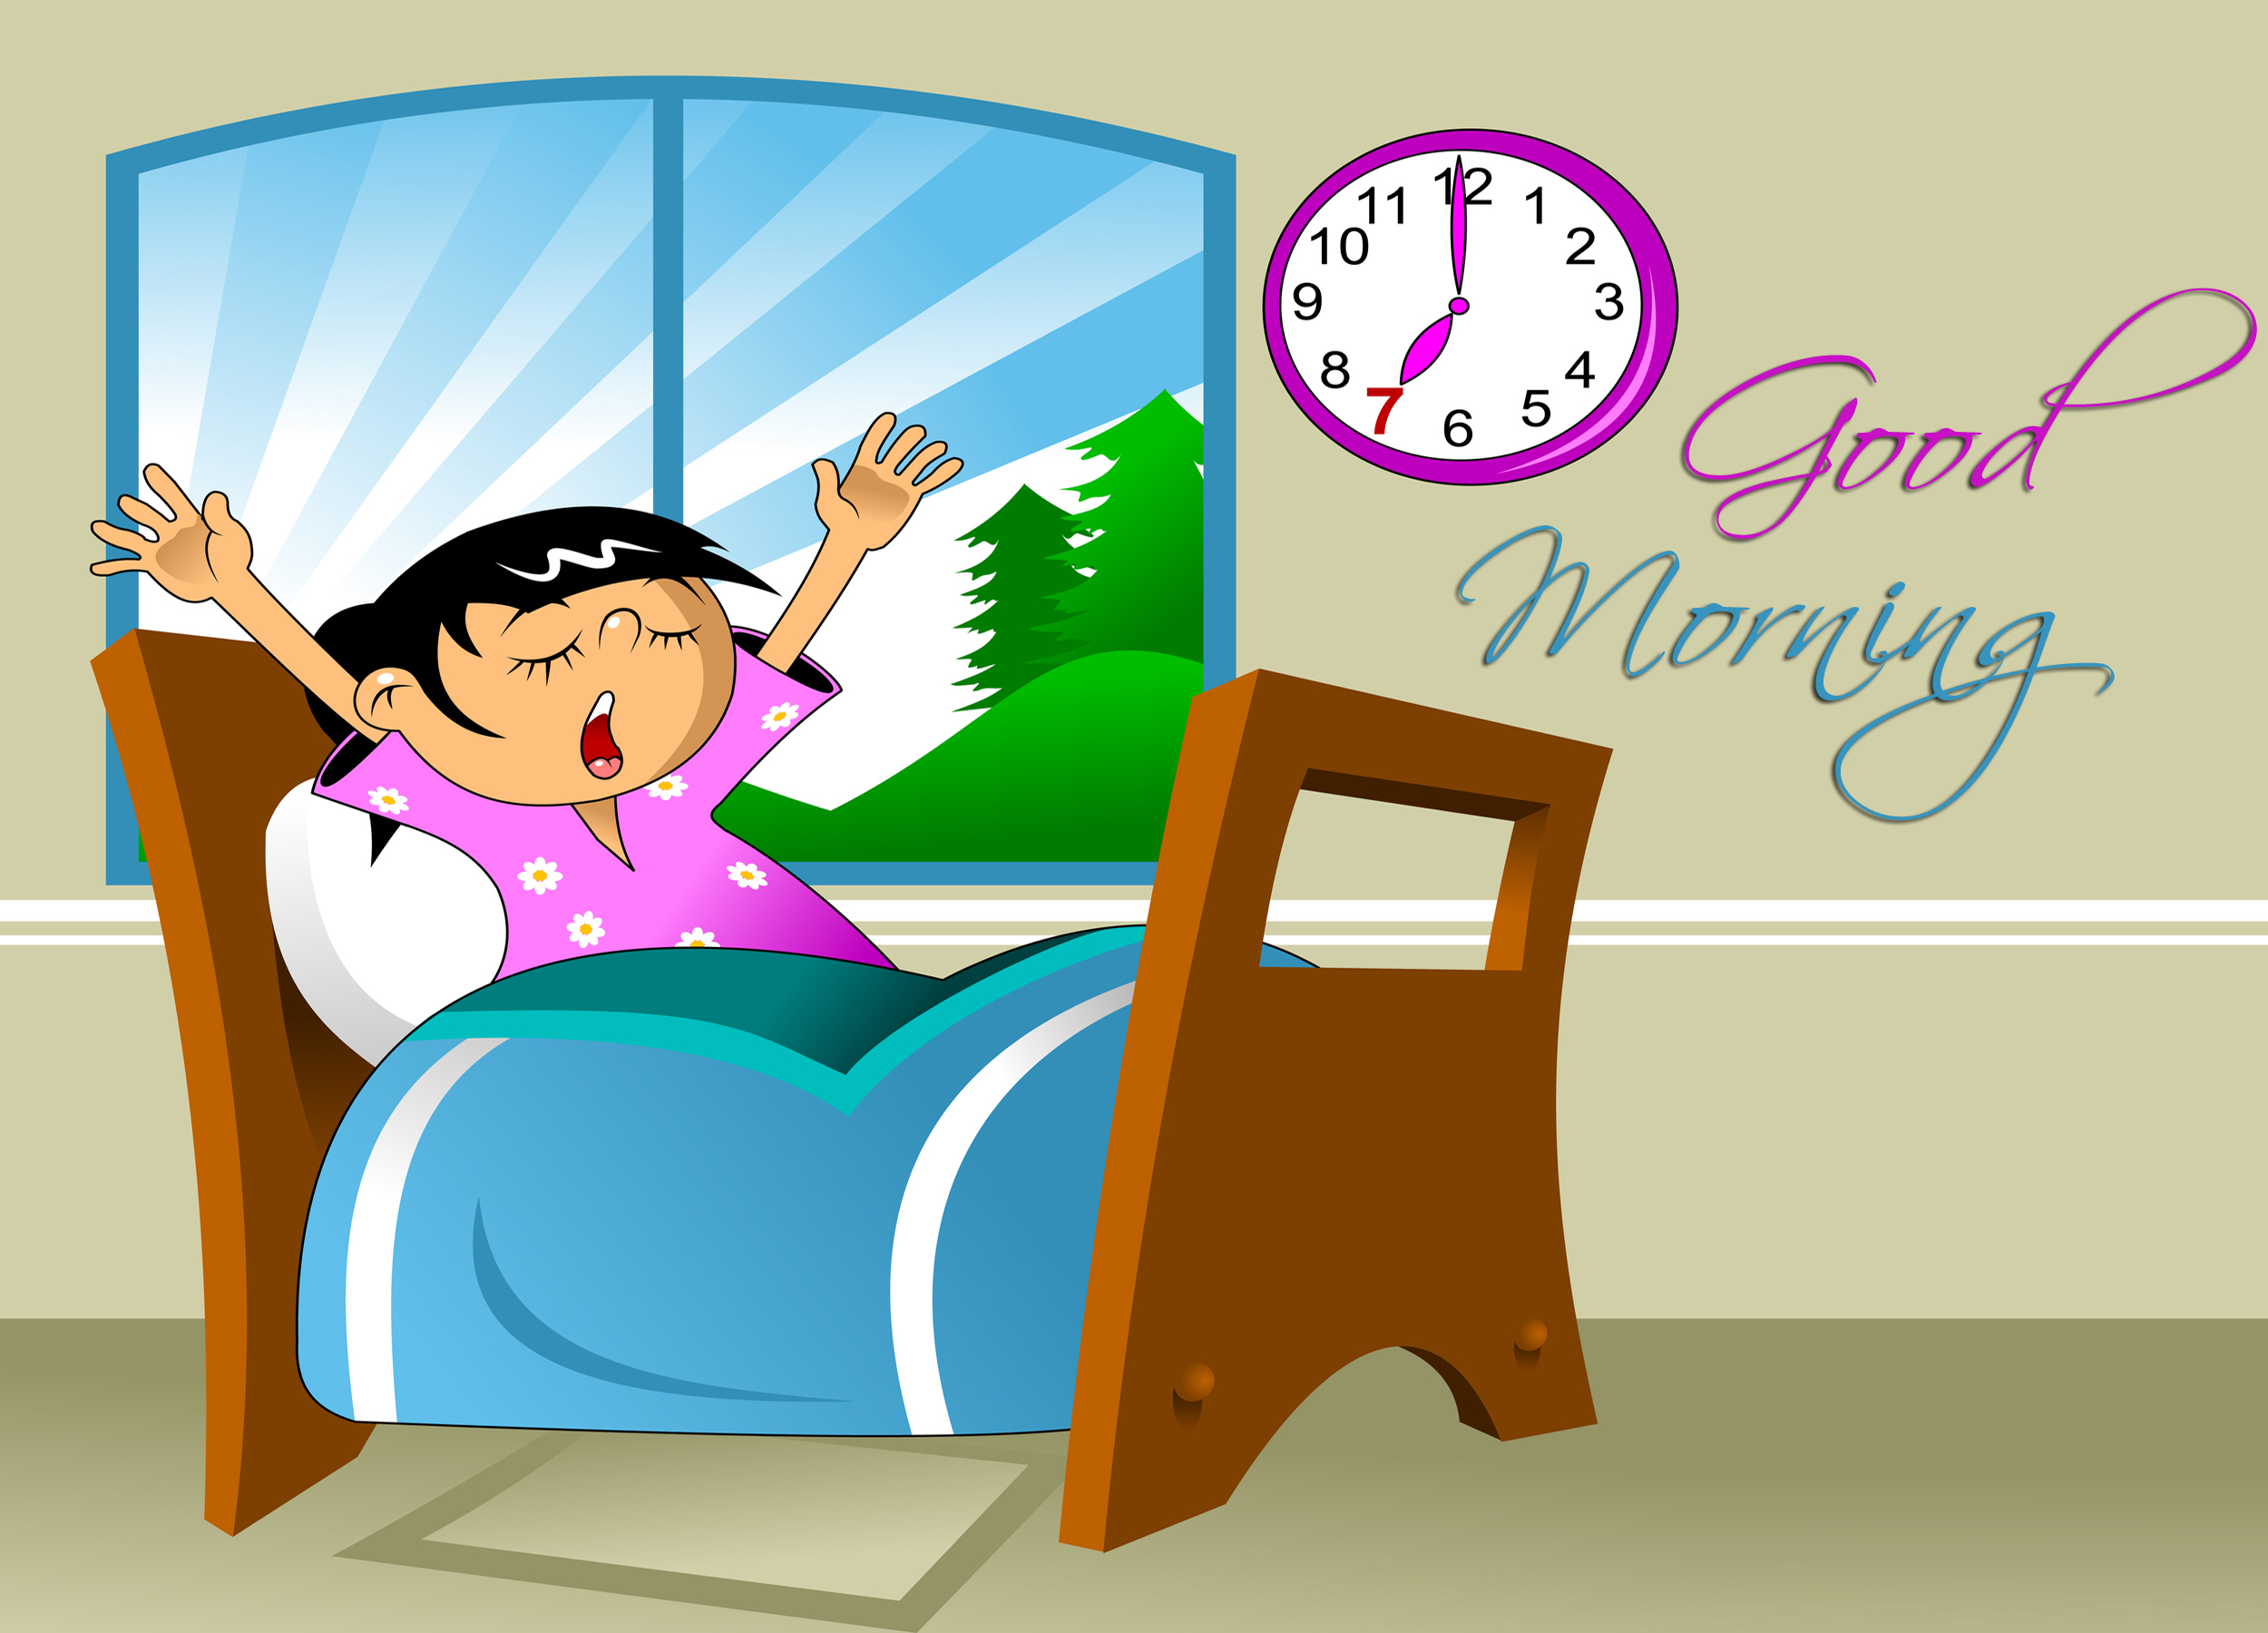 Best Good Morning Messages Quotes Sms Wishes - Good Morning Greetings Clipart - HD Wallpaper 